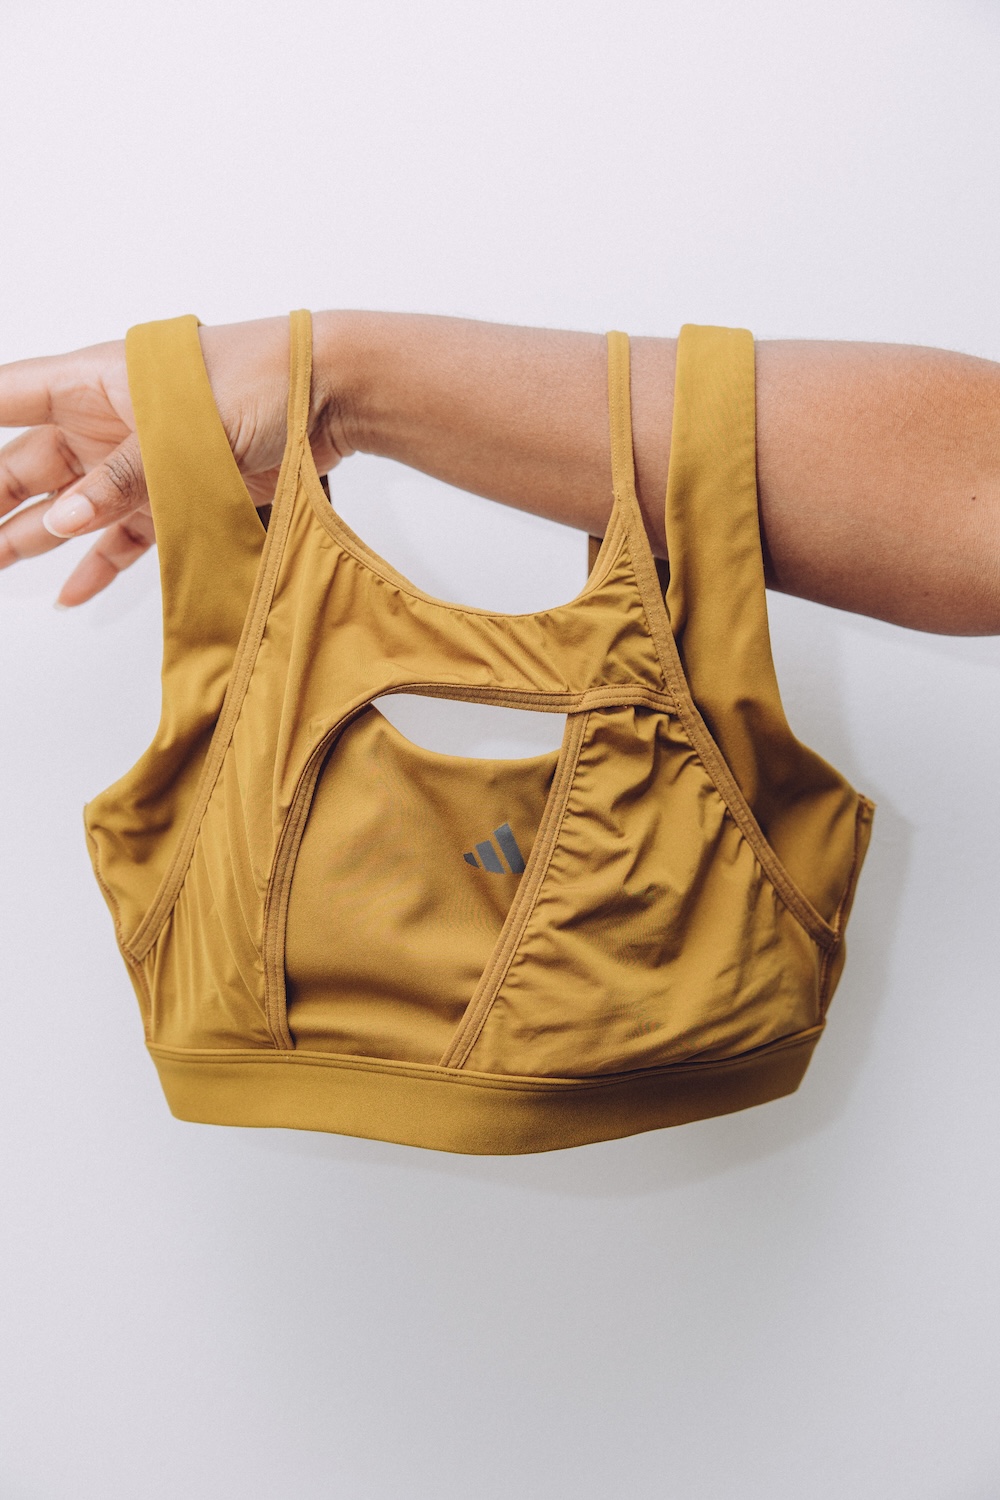 How To Wear A Sports Bra & Choose The Perfect Fit